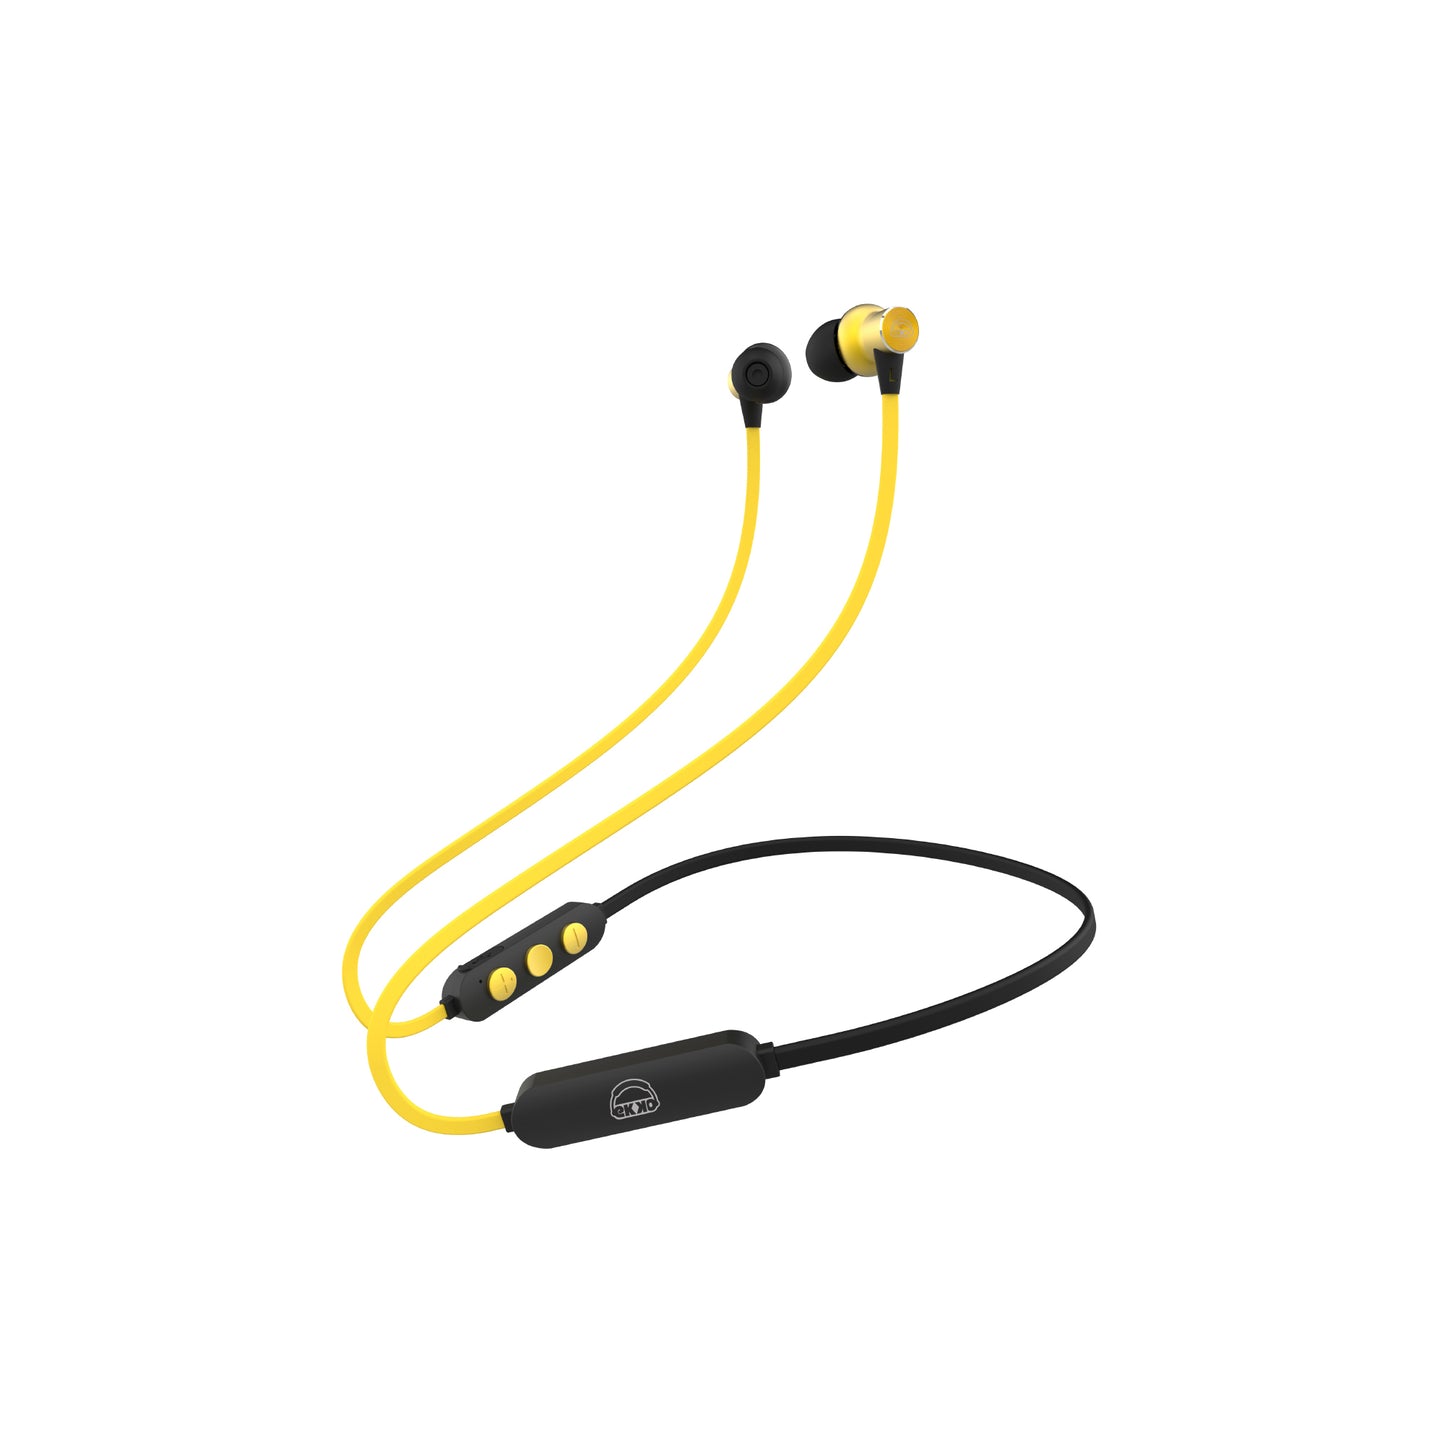 EKKO Unplug N02 Neckband with Super Sound Heavy Bass, Playback time Upto 15 Hours, Max BASS, TwinConnect, Siri & Google Assistant Activate